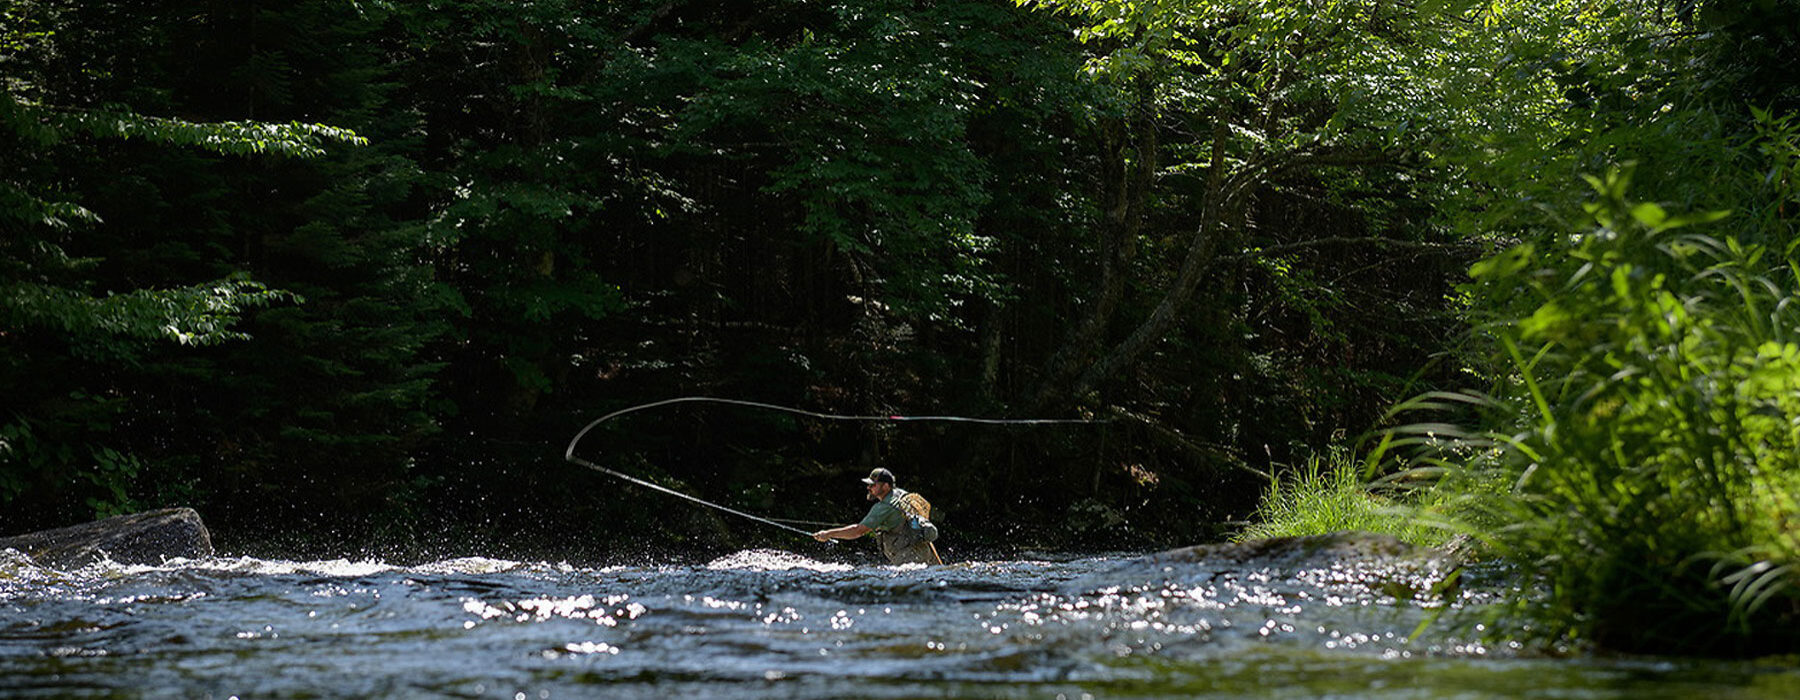 Fly fishing in a Vermont river.  © Kurt Budliger